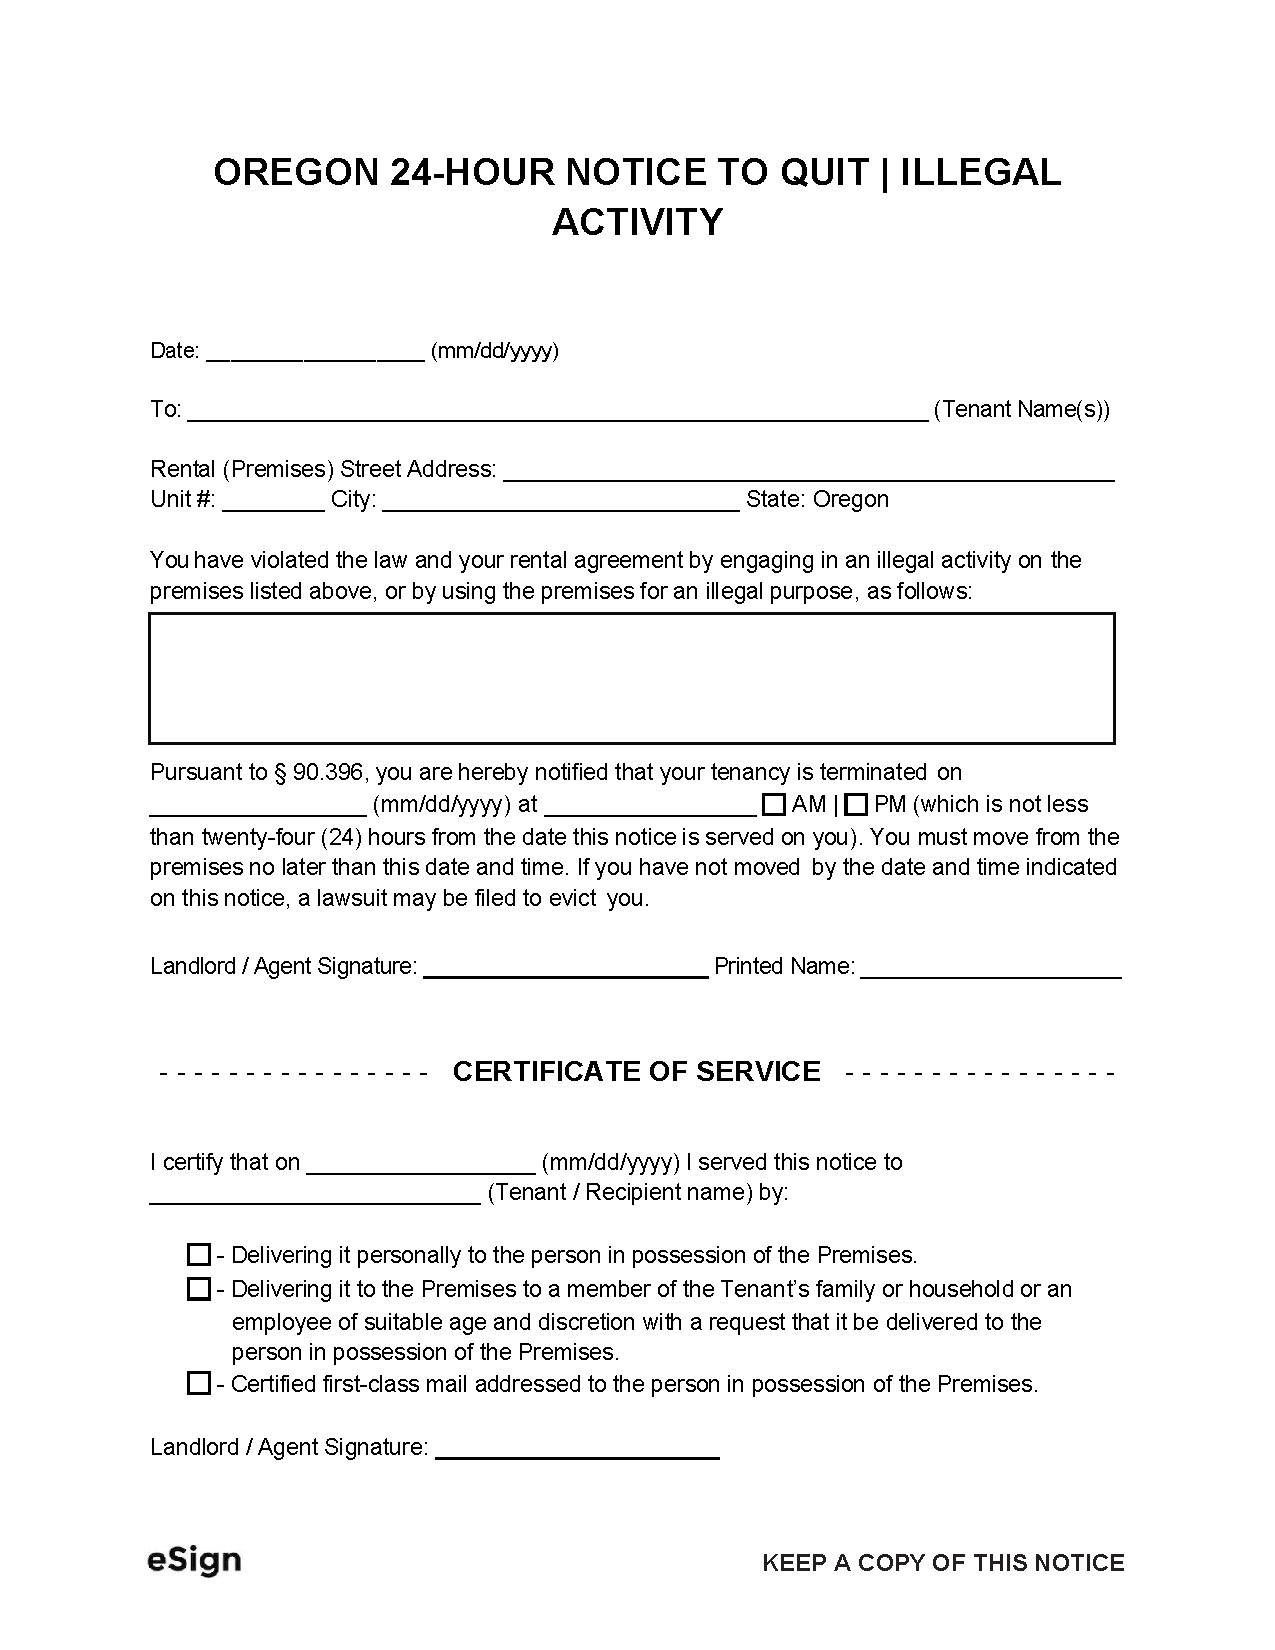 free-oregon-24-hour-notice-to-quit-illegal-activity-pdf-word